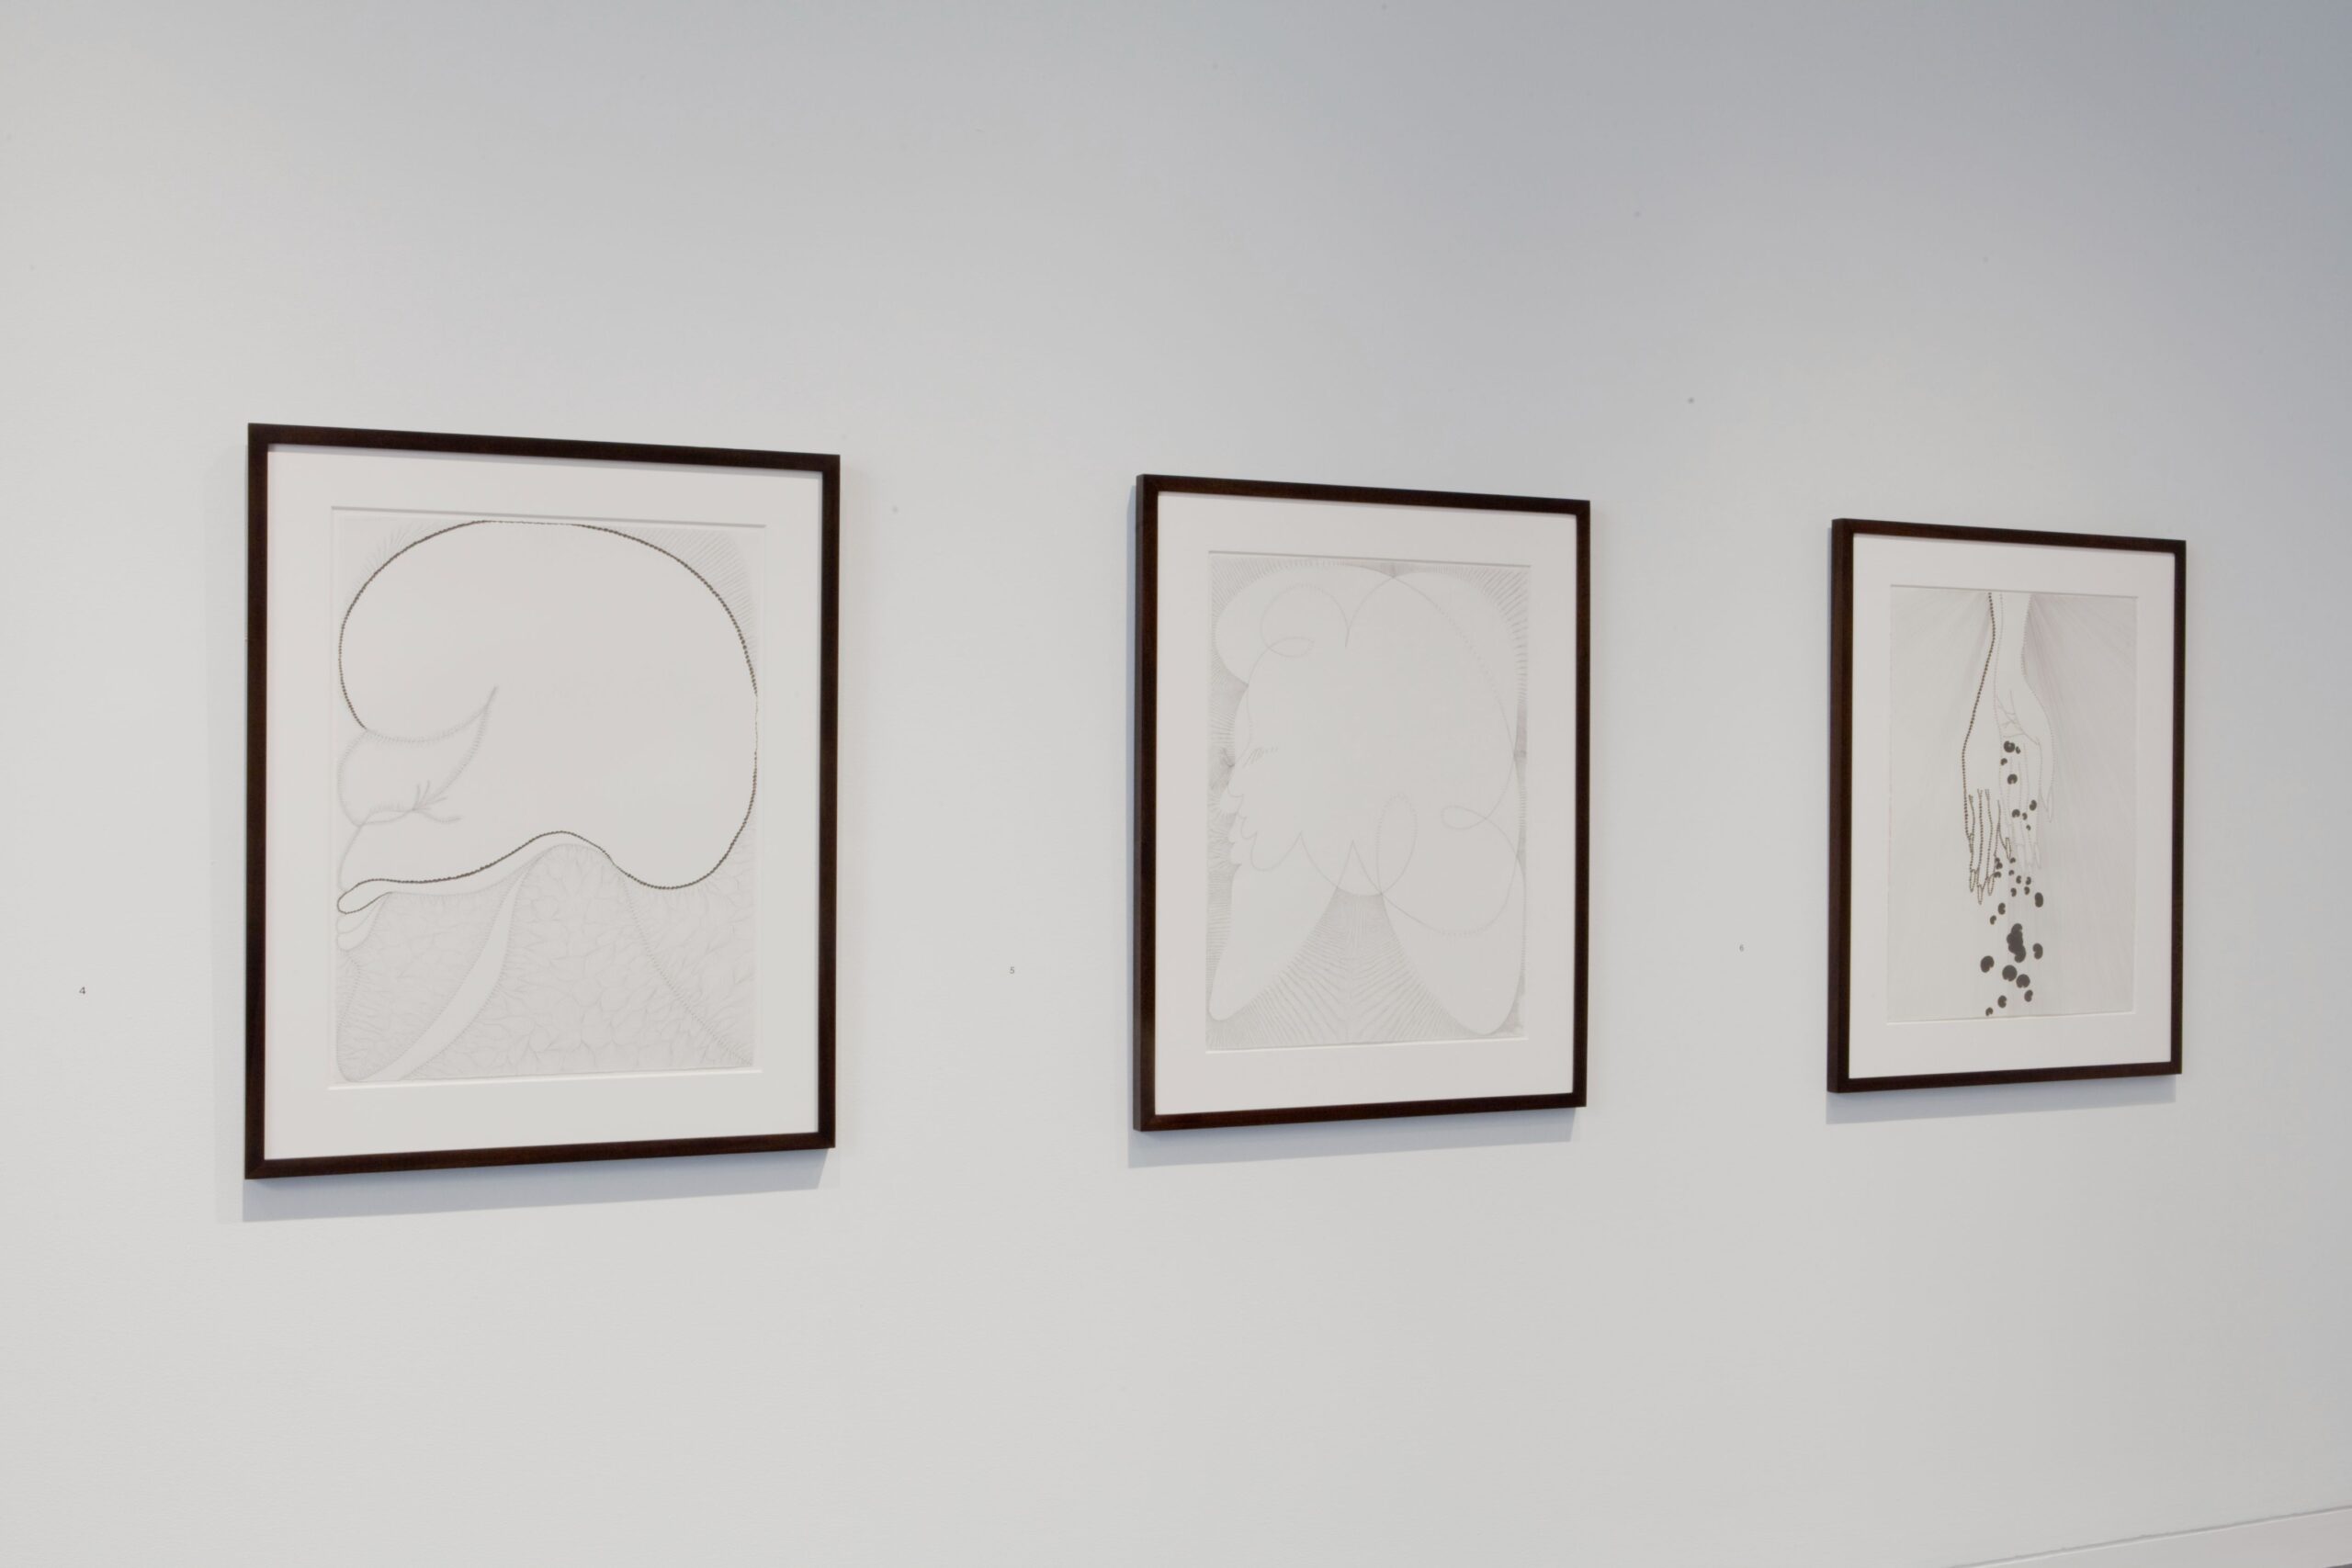 A row of framed drawings resembling minimalist portraits of faces in profile hanging in a row on a white gallery wall.